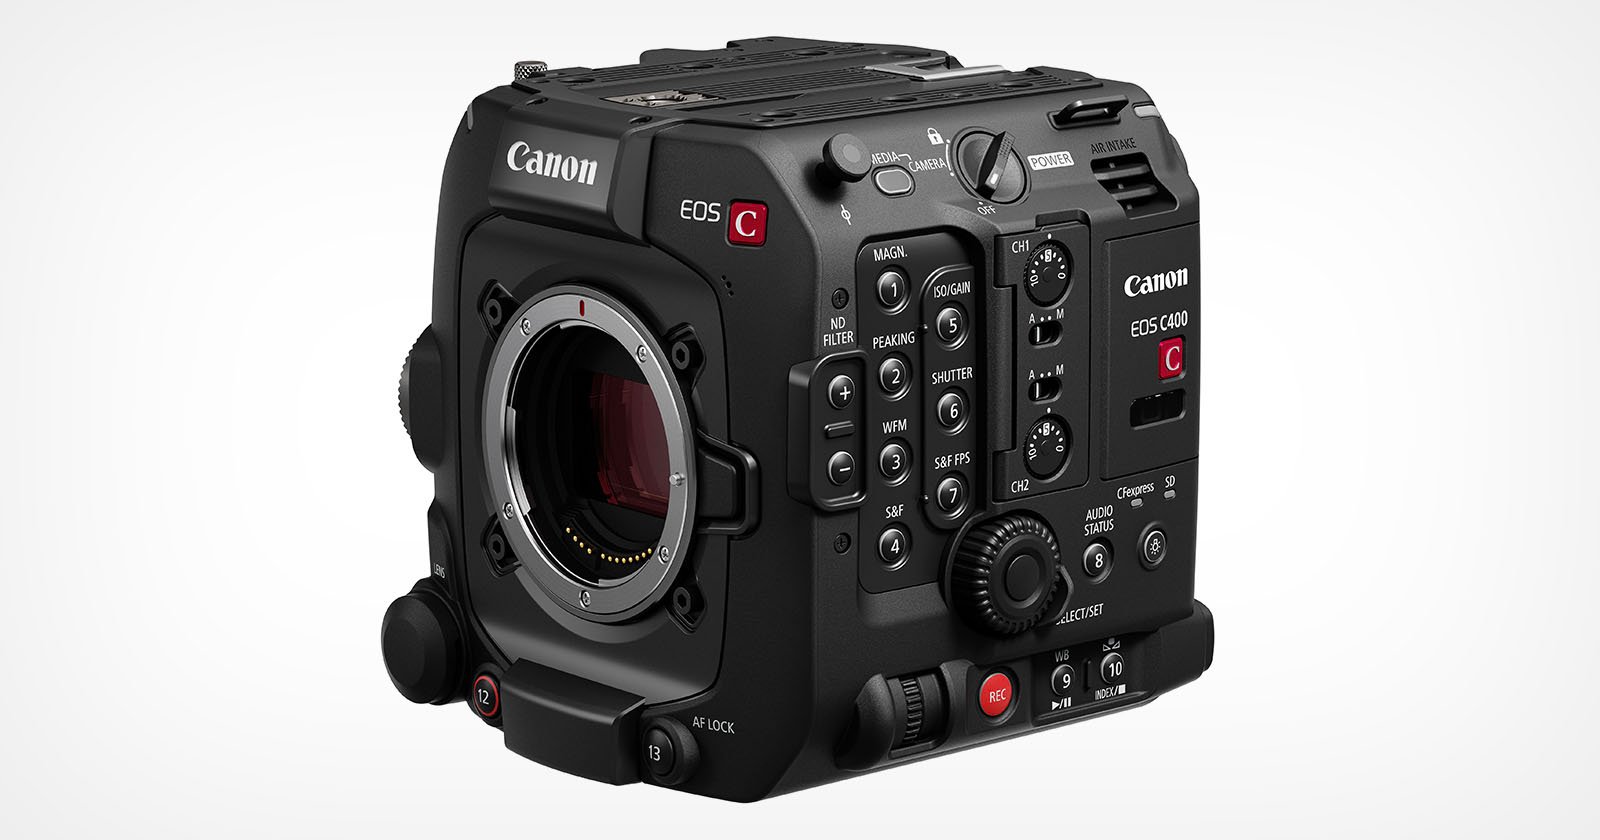 Close-up of a Canon EOS C500 Mark II, a professional cinema camera. The camera is black with various buttons, dials, and labels on its body. The lens mount is exposed, showcasing metal contact points. The Canon logo and model name are prominently displayed.